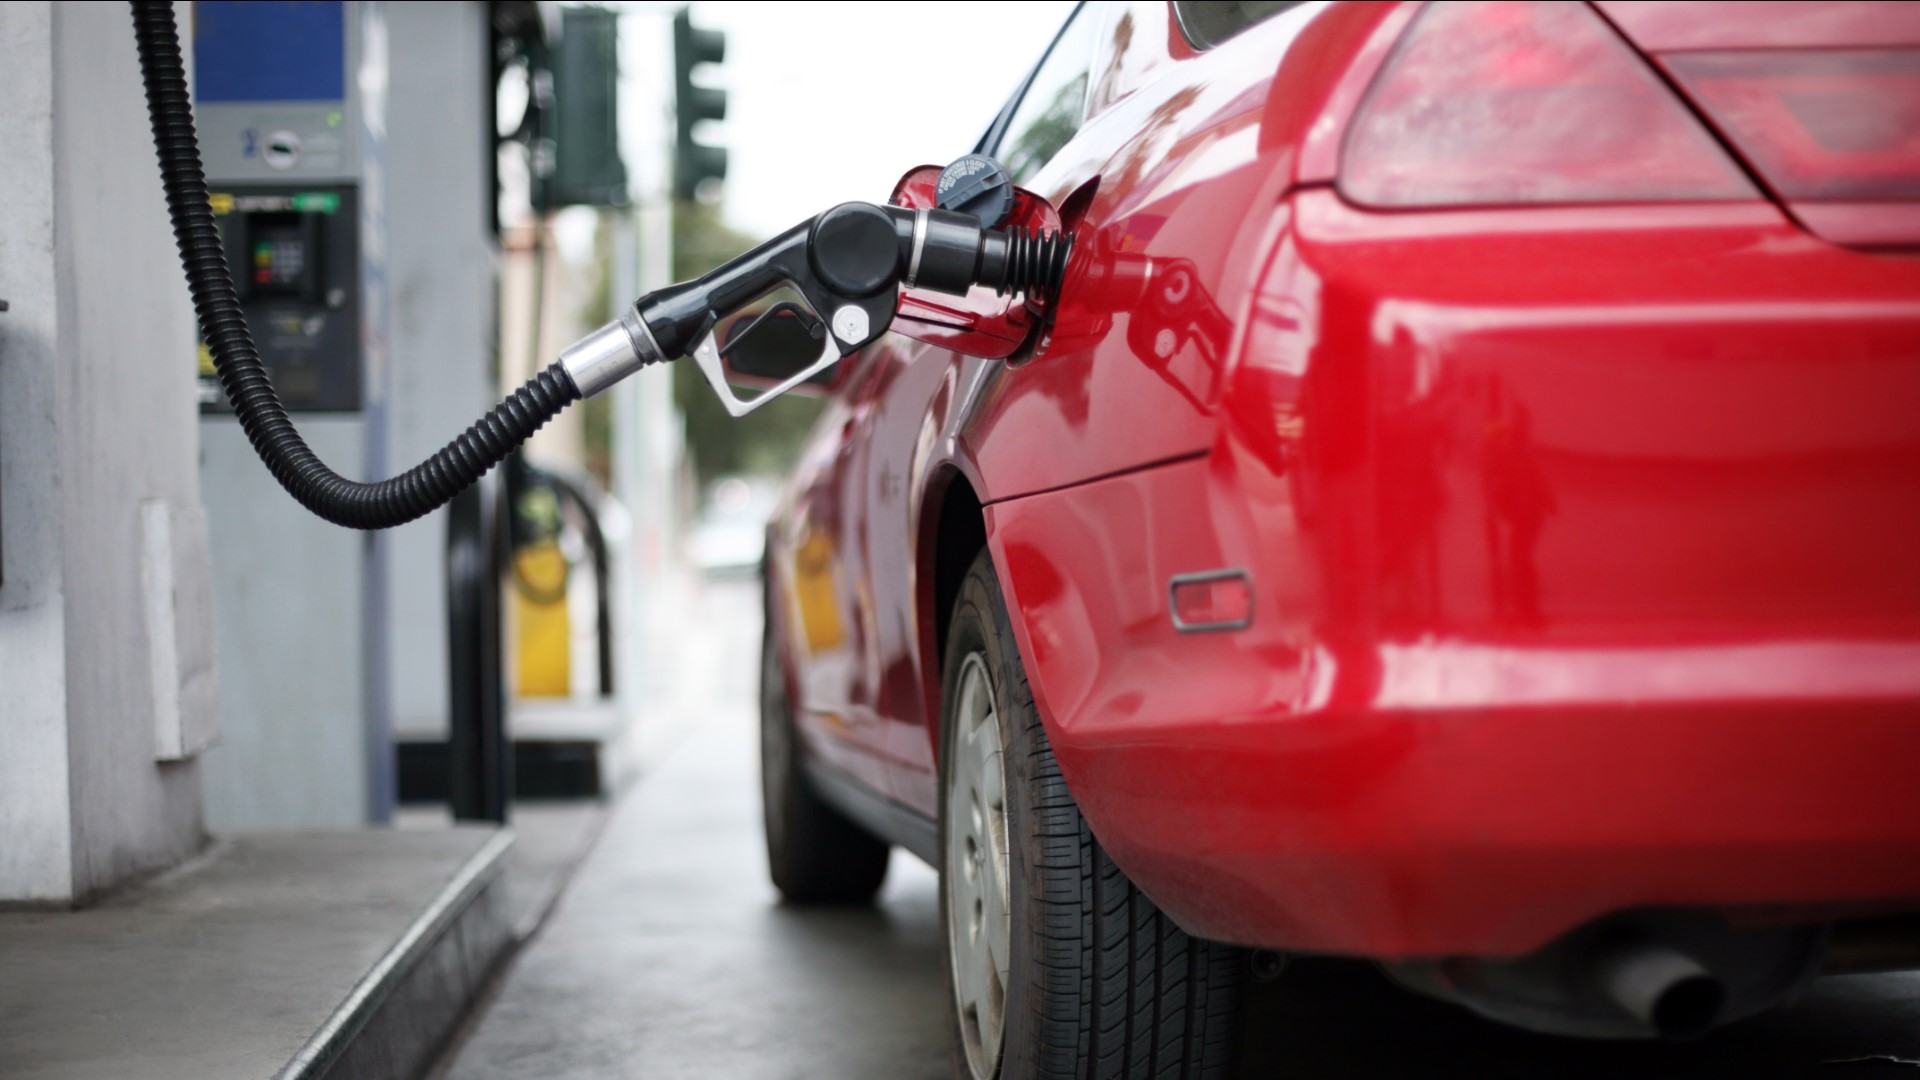 The Verify team looked into why gas prices have been on the rise since November of last year.